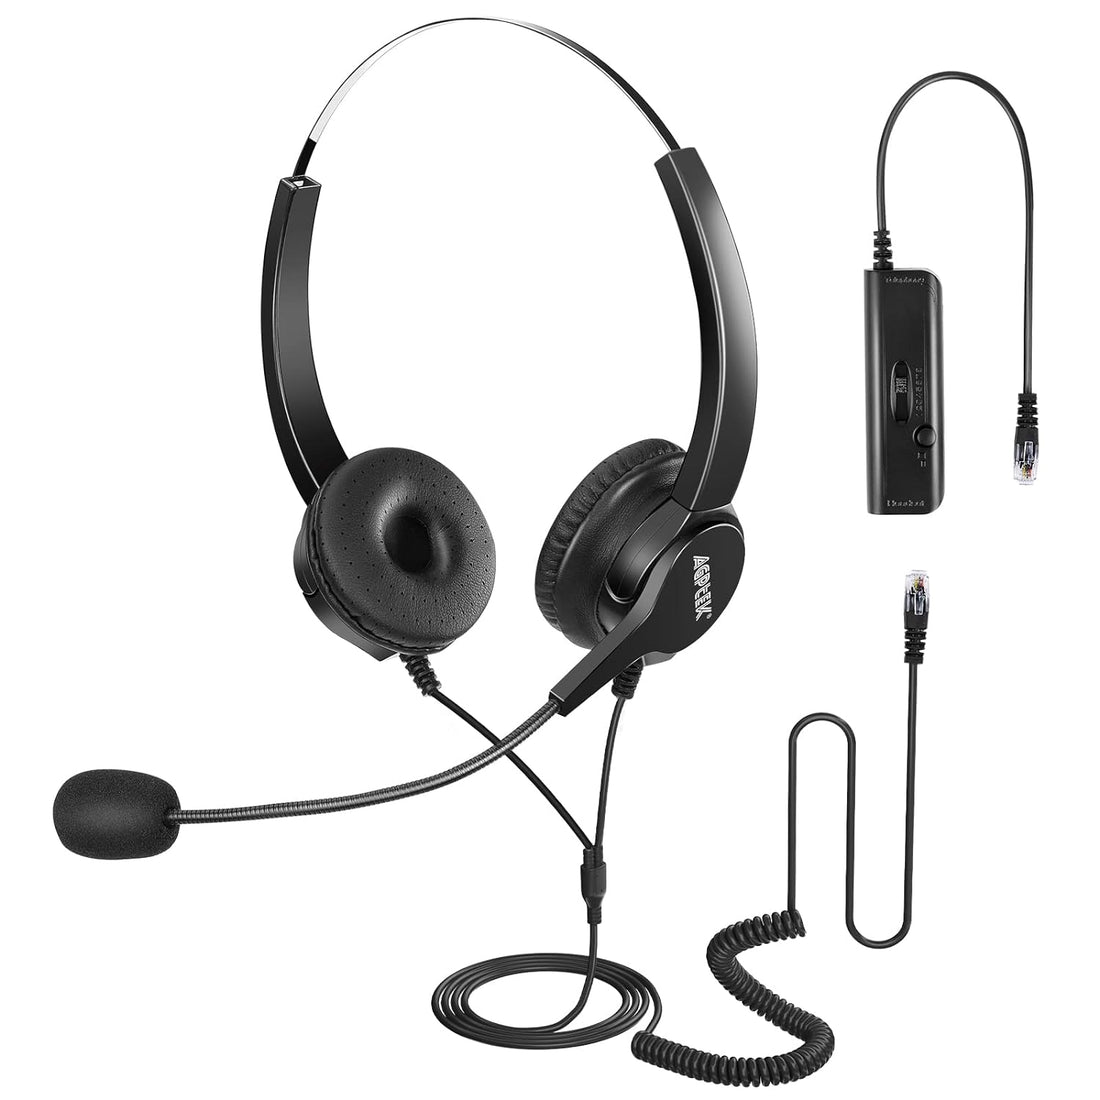 AGPtEK Hands-Free Call Center Noise Cancelling Corded Binaural Headset Headphone with 4-Pin RJ9 Crystal Head and Mic Mircrophone for Desk Phone - Telephone Counseling Services, Insurance, Hospitals